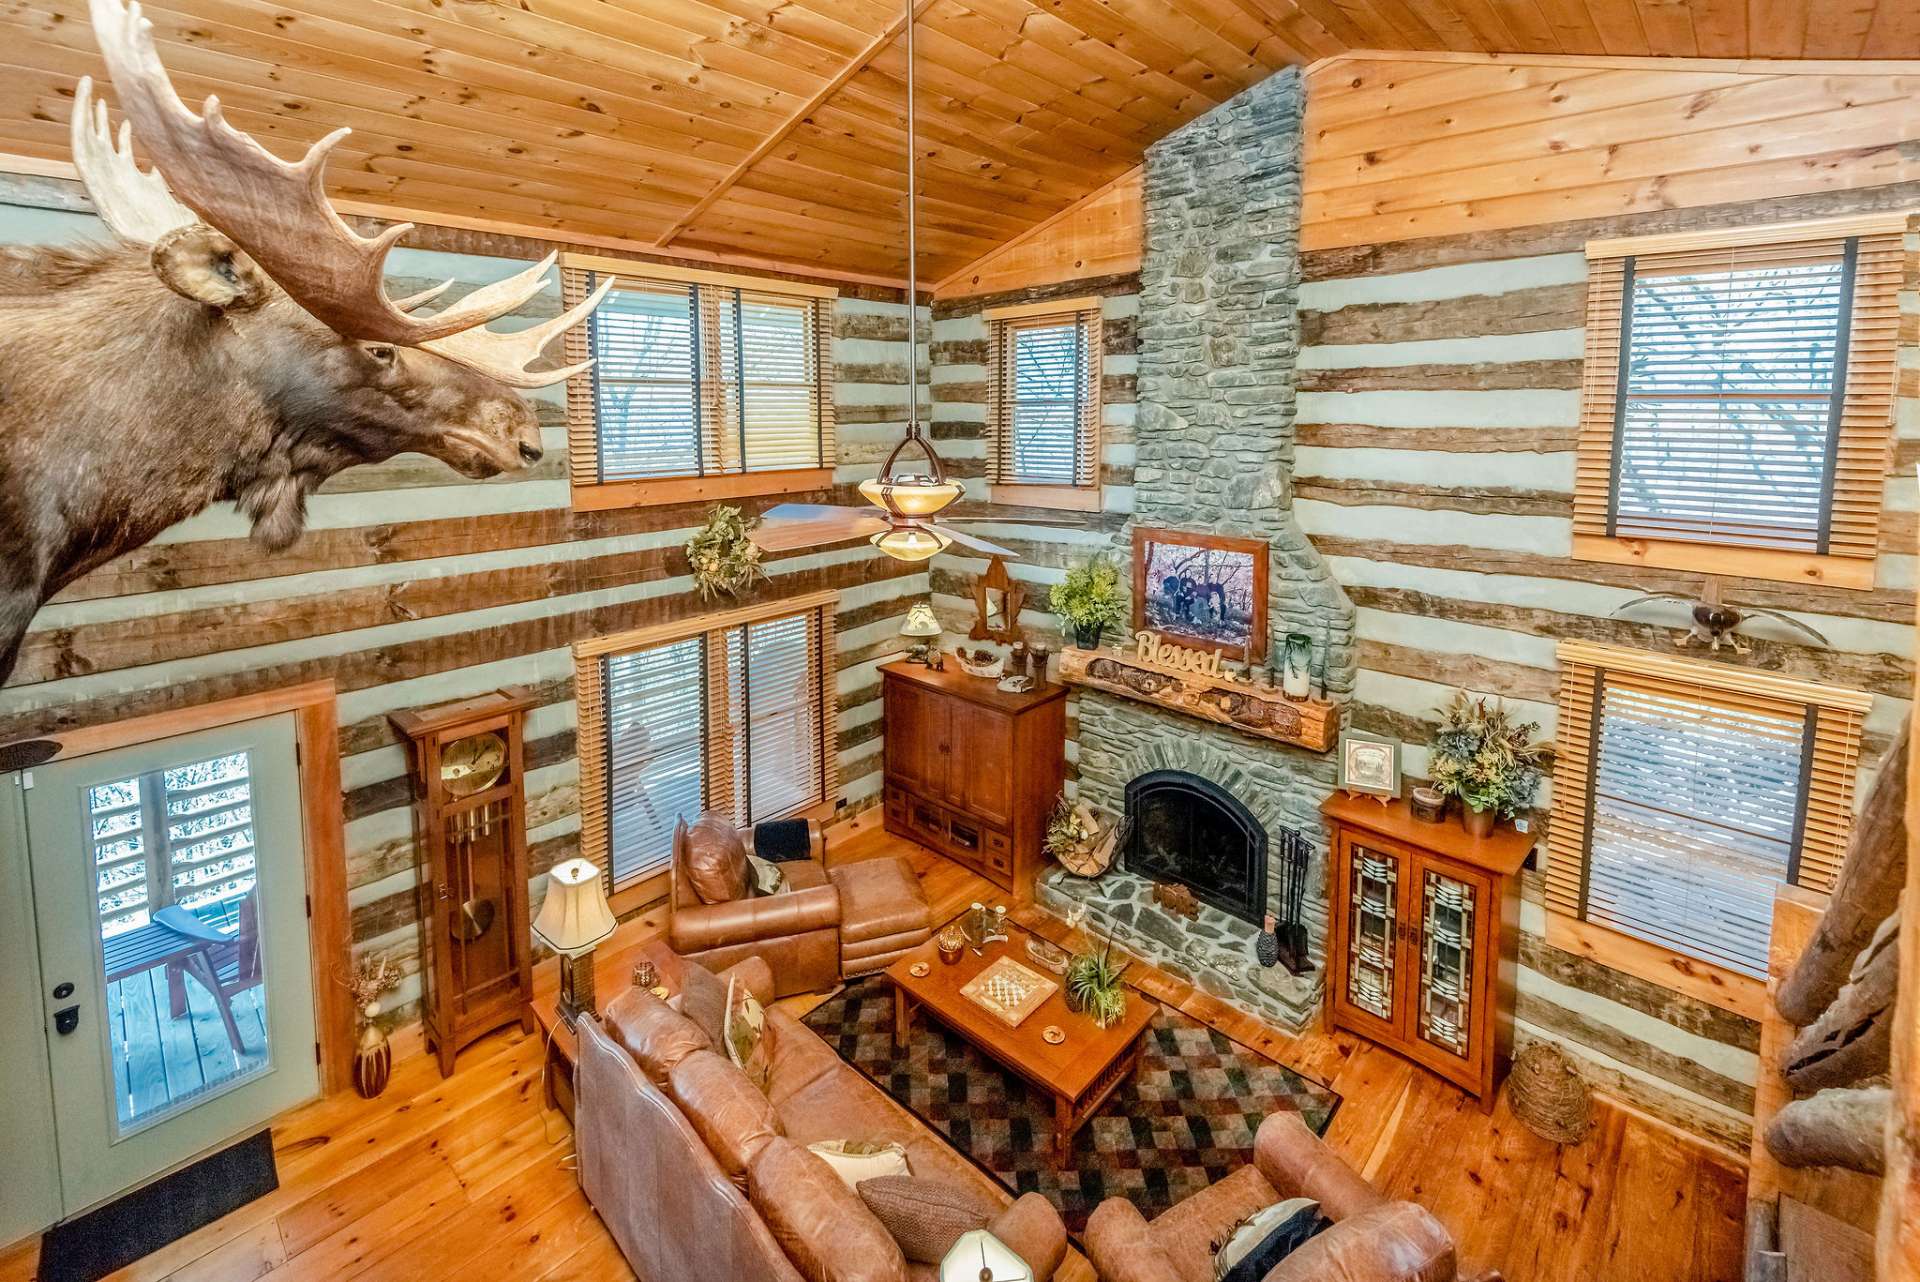 A Floor to ceiling flagstone wood-burning fireplace will keep you warm on those chilly winter nights while abundant windows fill the home with natural light.